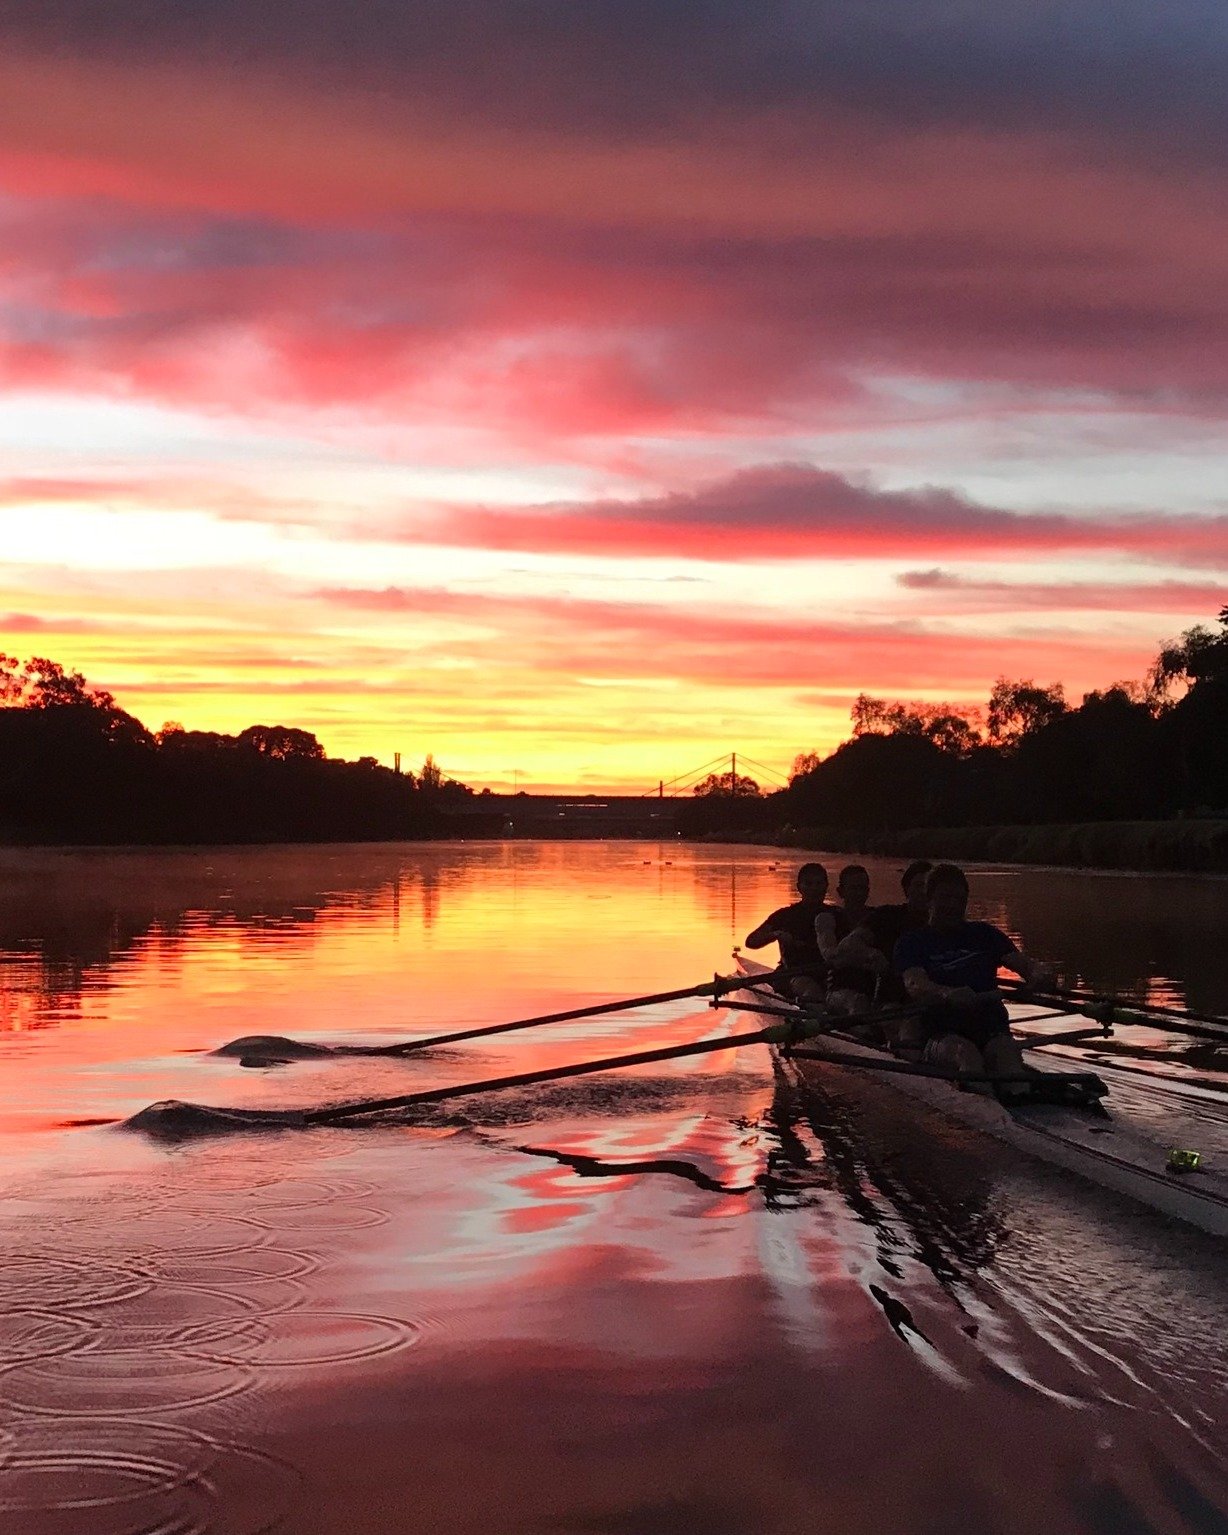 🌺 Join the Barwon Rowing Club this ANZAC Day for the mid-morning ANZAC service, honouring our serving, previous and fallen heroes, and the annual Richardson Cup scratch regatta 🌺

This Thursday, the Barwon Rowing Club and Corio Bay Rowing Club will